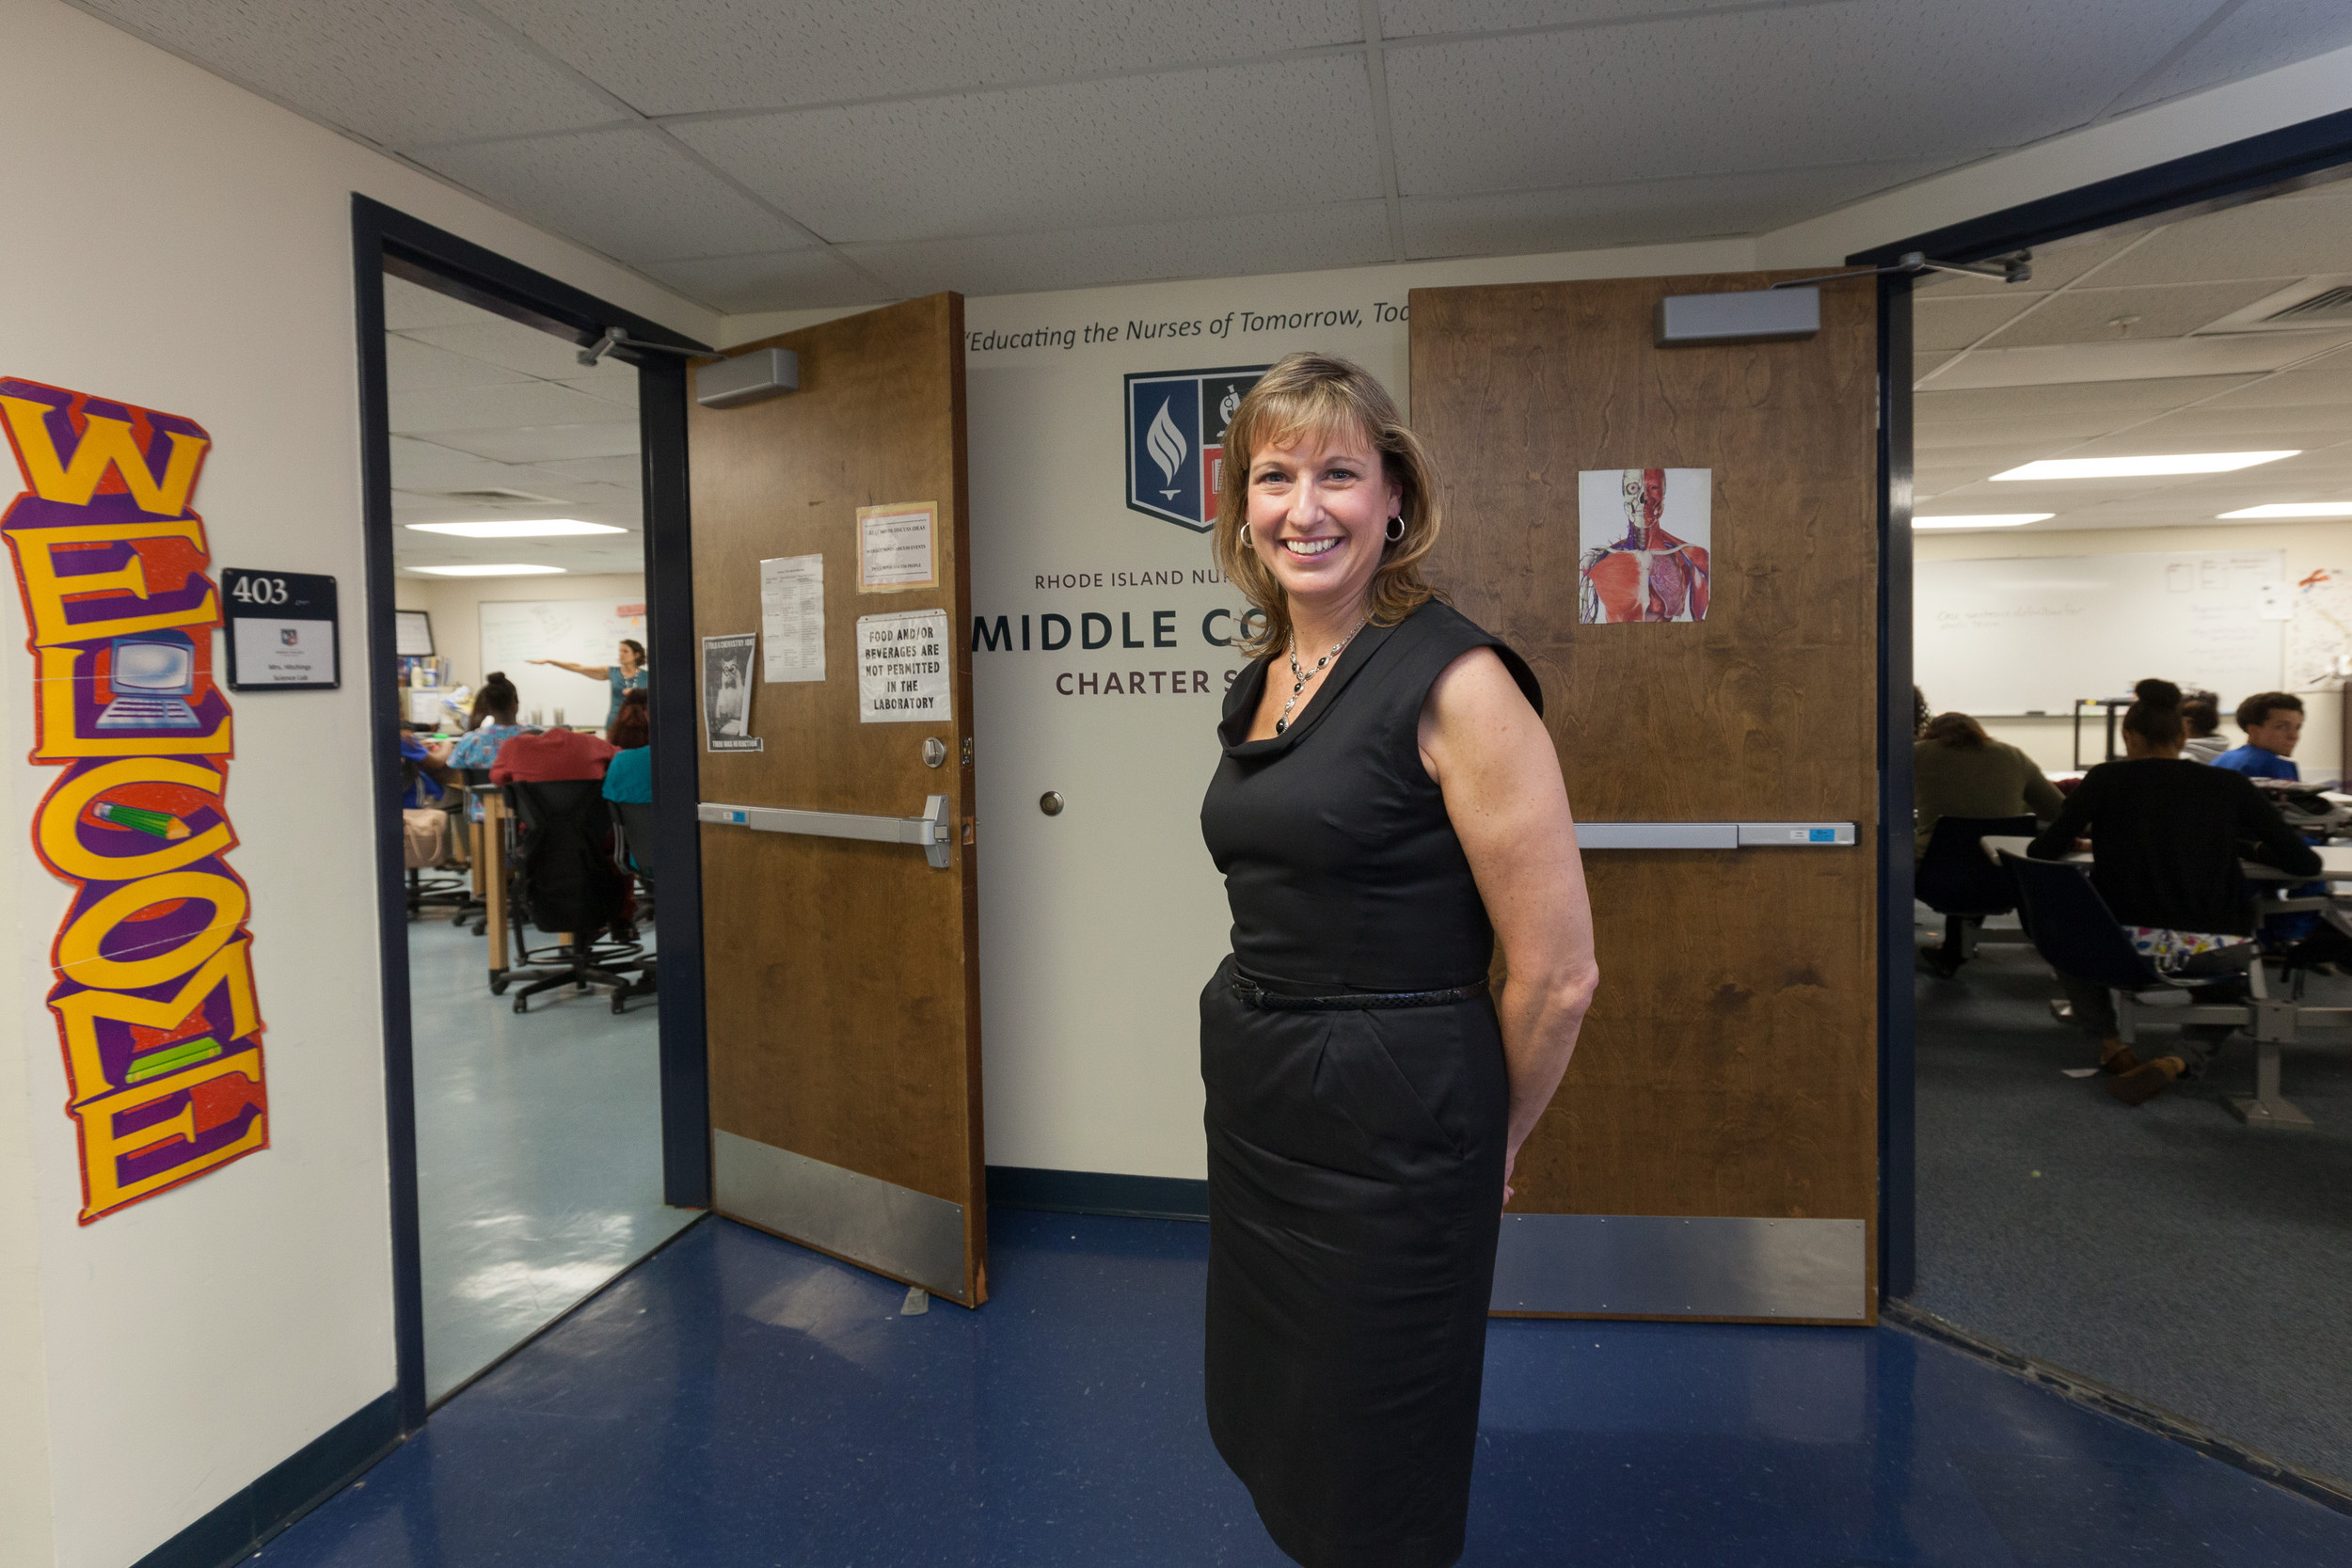 “We’re building the future nursing workforce in Rhode Island, one that will position nurses at the collaborative center of care,” says Pamela McCue, CEO of the R.I. Nurses Institute Middle College Charter School. The four-year program, located on the fourth floor of Roger Williams University building in Providence, has a college-like atmosphere.